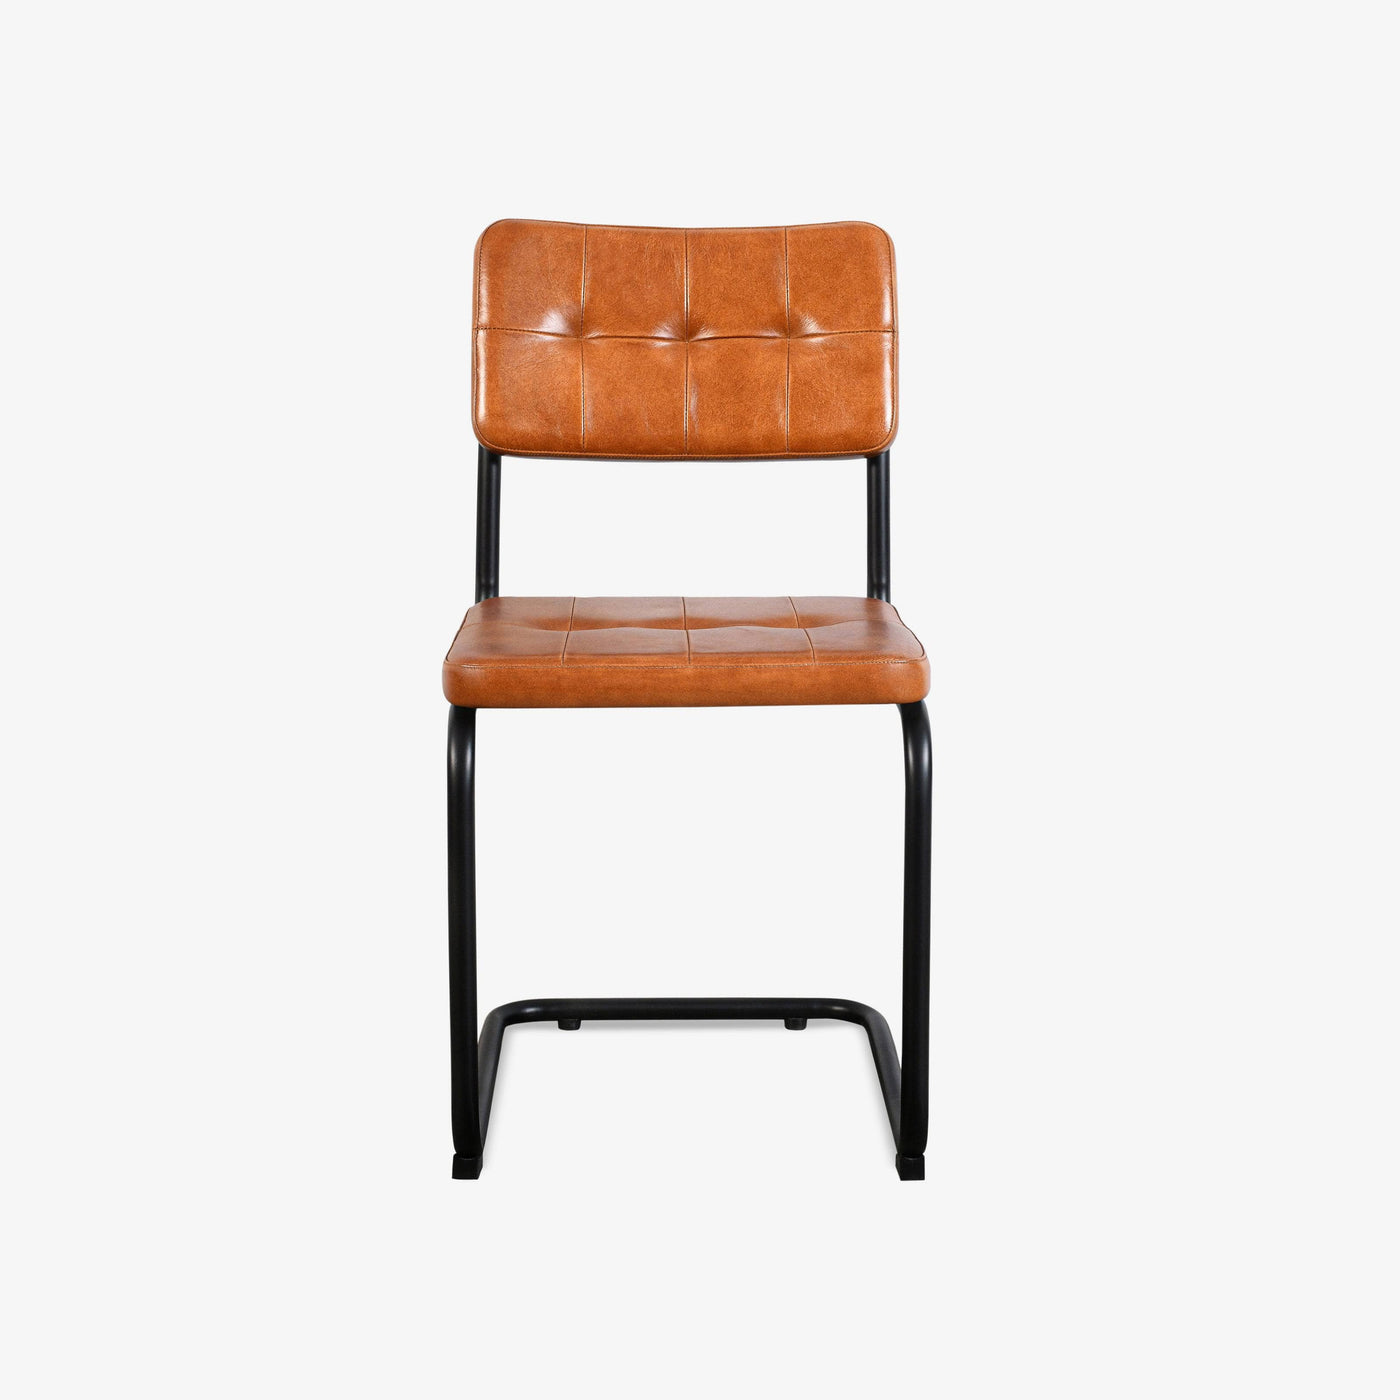 Iron Leather Chair, Brown, 44x53x88 cm - 1